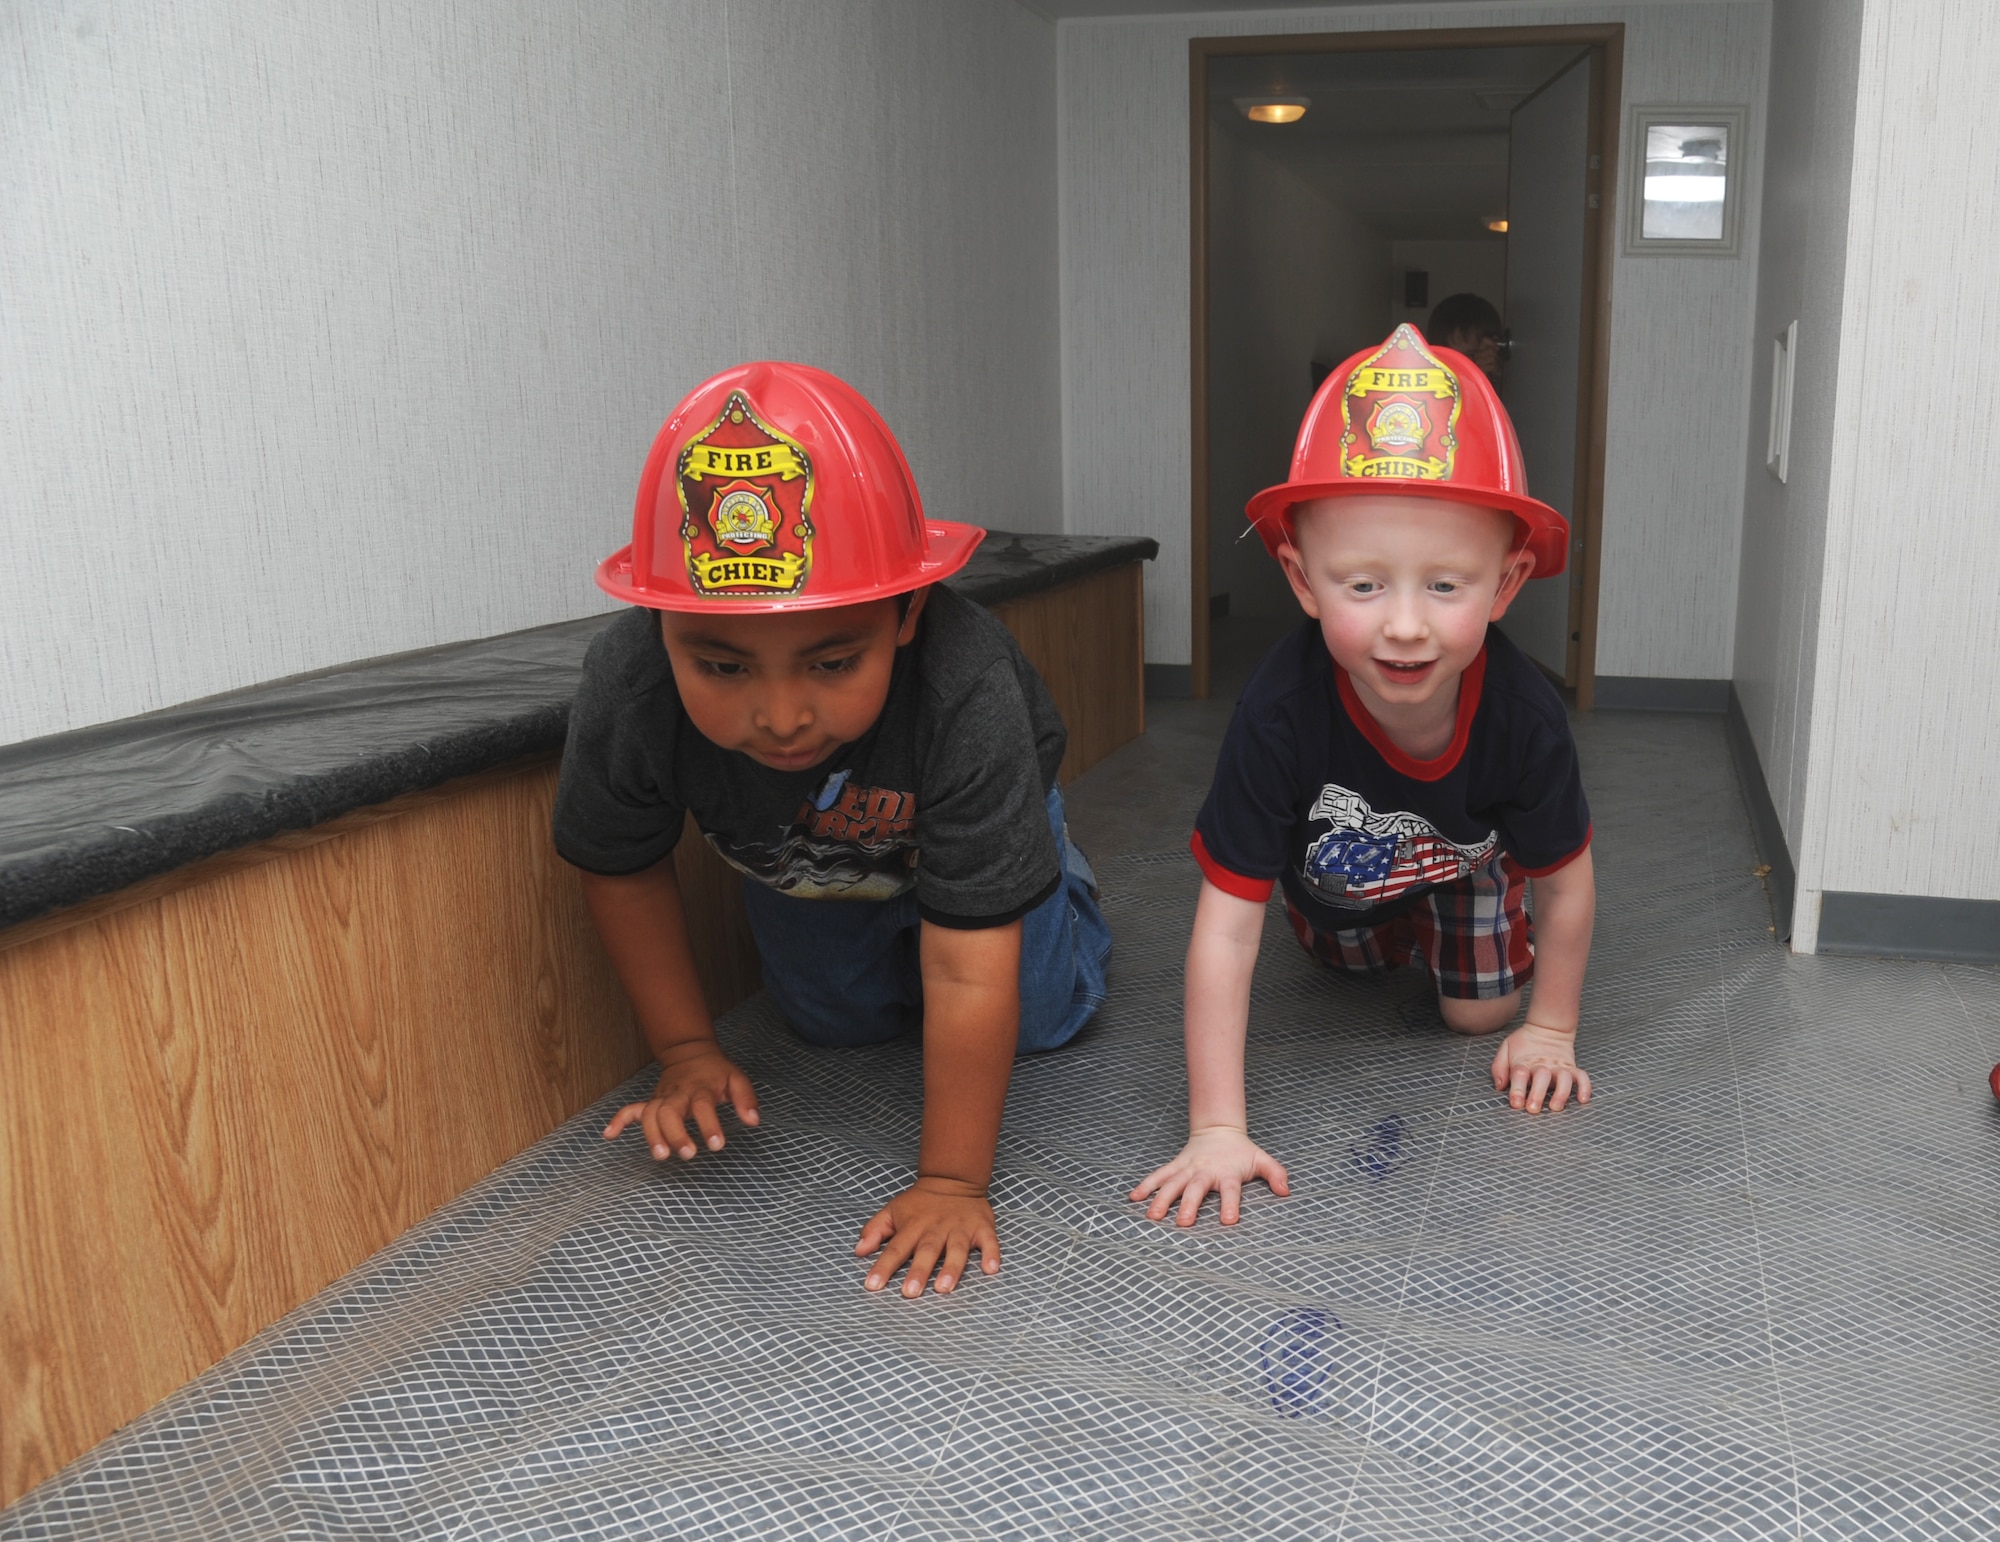 Javier Tate, 6, and Jackson Dossett, 4, crawl safely through a fire safe house during the Keesler Fire Department’s open house Oct. 13, 2012, Keesler Air Force Base, Miss.  The event was held on the final day of fire prevention week during which the fire department conducted random fire drills throughout the base, toured various facilities with Sparky the Fire Dog, passed out fire safety handouts and fire hats for children and provided stove and fire extinguisher demonstrations.  Javier’s mom is Lt. Col. Rashone Tate, 81st Communications Squadron commander.  Jackson’s mom is Capt. Laura Dossett, 81st Surgical Operations Squadron.  (U.S. Air Force photo by Kemberly Groue)